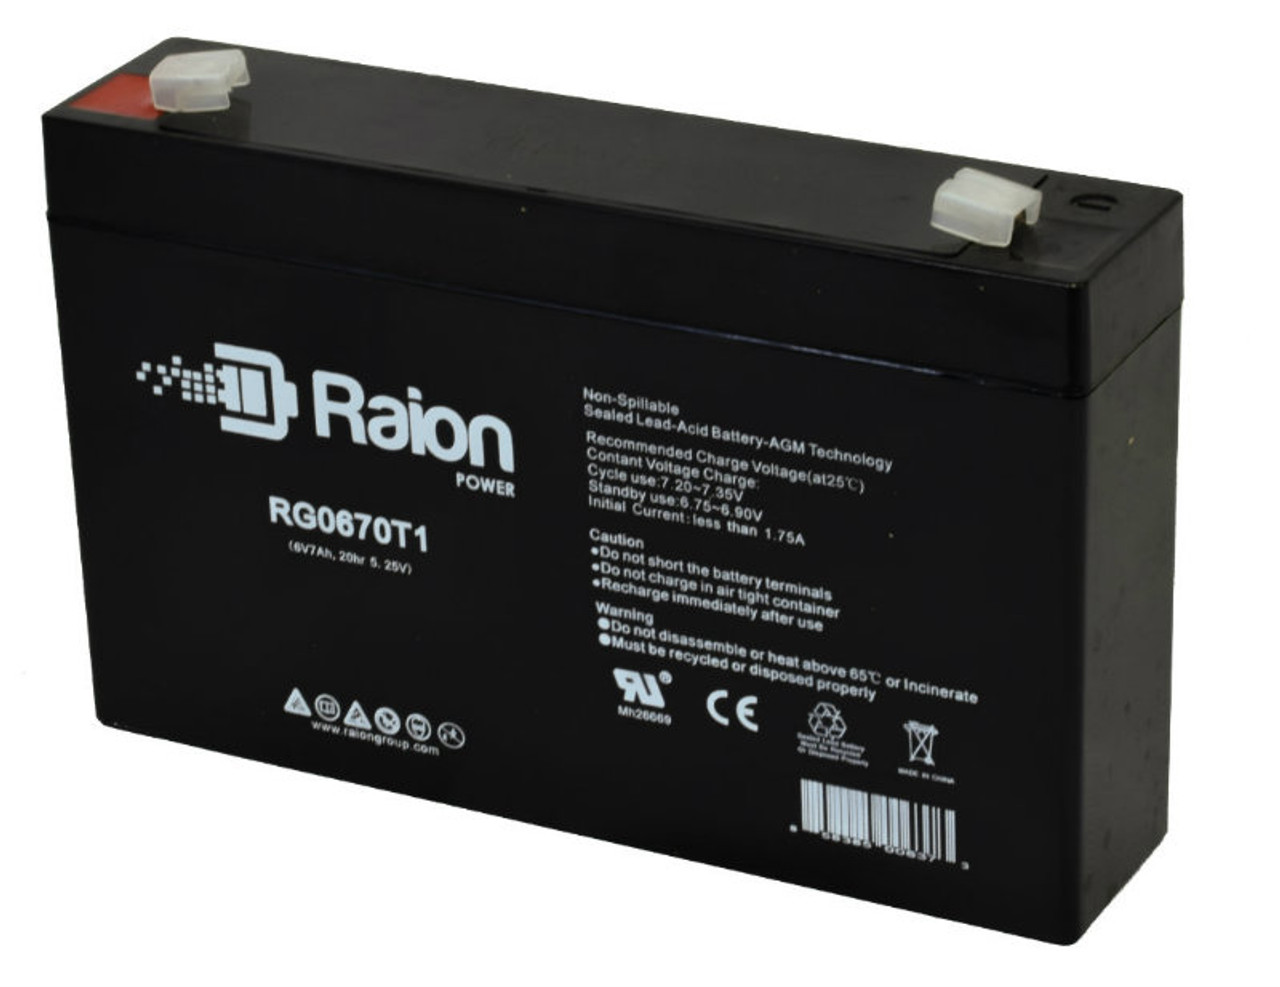 Raion Power RG0670T1 6V 7Ah Replacement Battery Cartridge for FIAMM FG10721